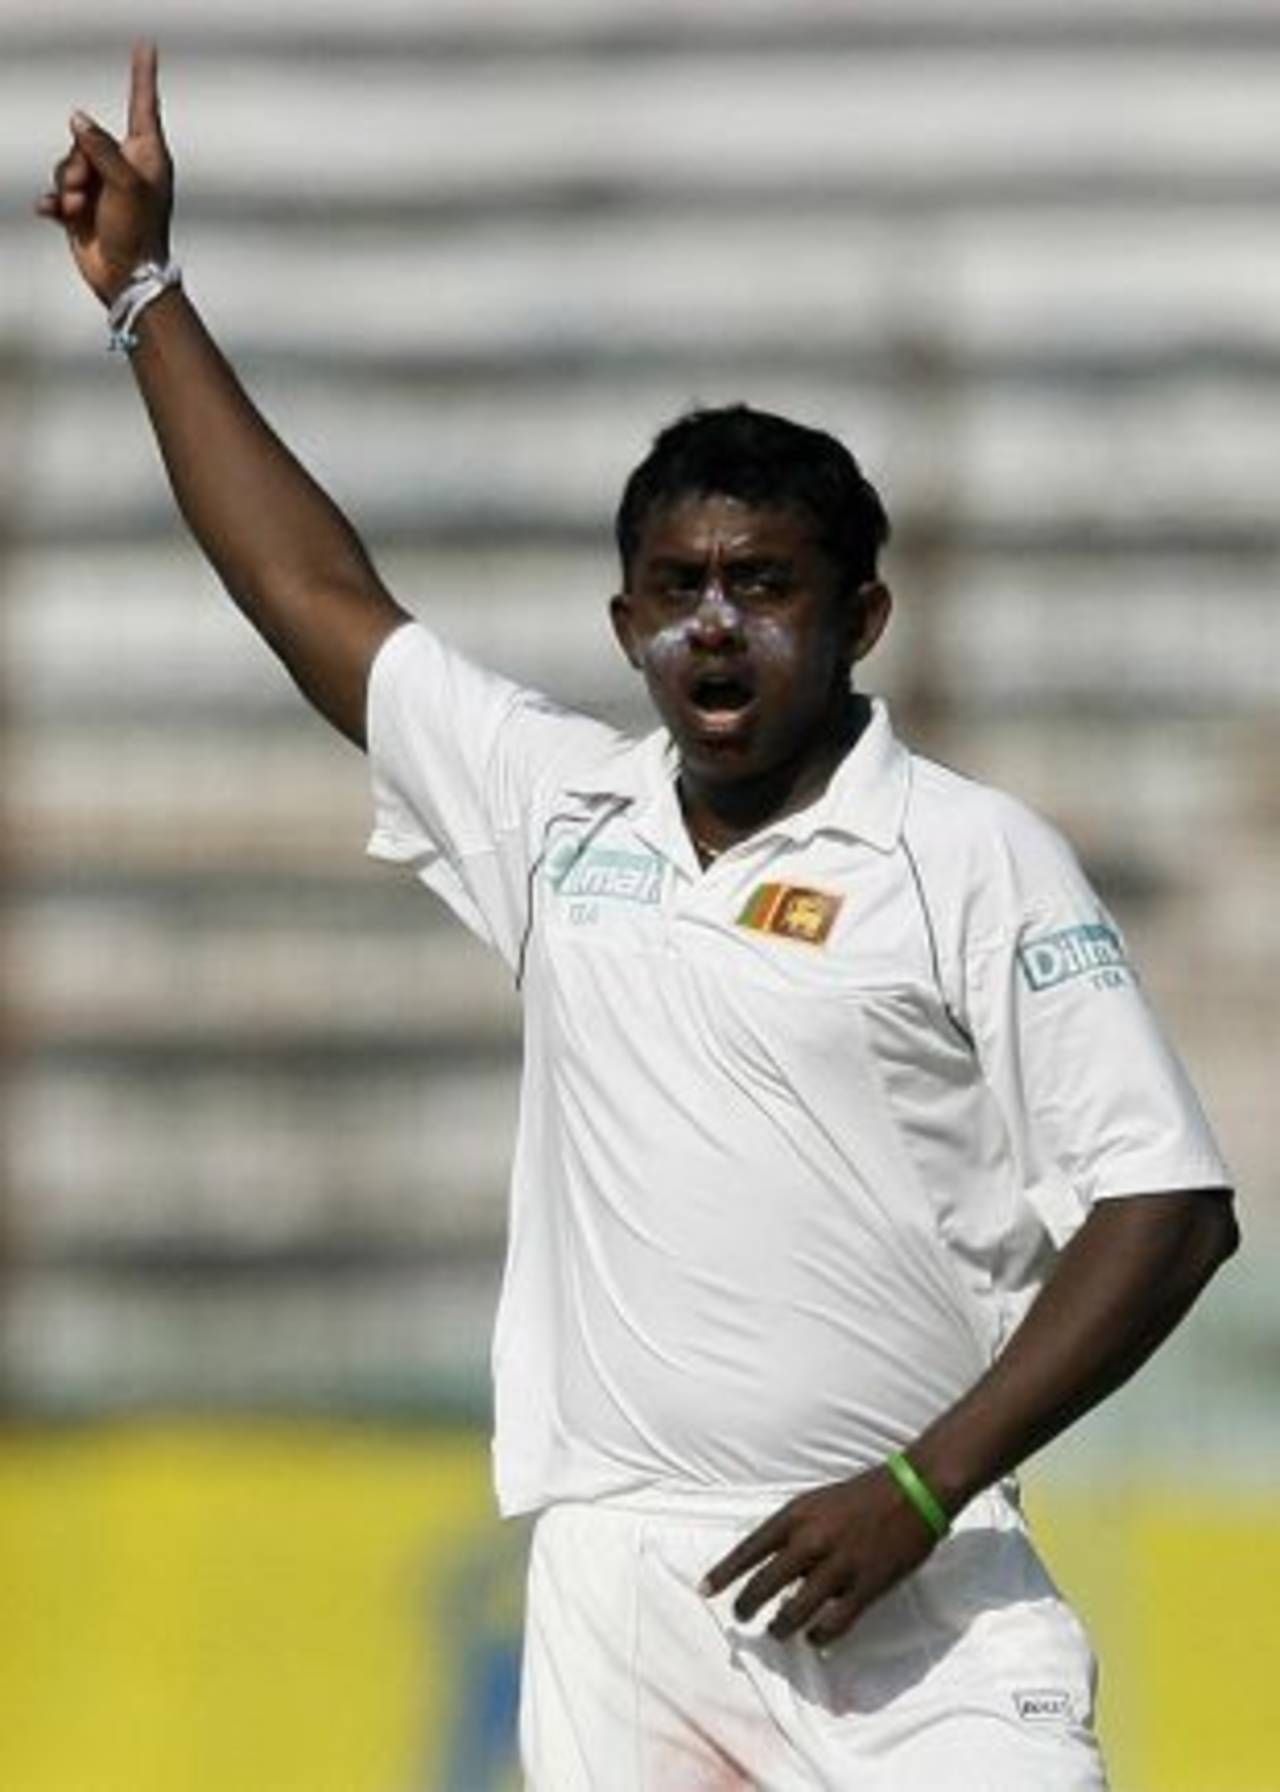 Ajantha Mendis is delighted after picking up Shakib Al Hasan's wicket, Bangladesh v Sri Lanka, 2nd Test, Chittagong, 2nd day, January 4, 2009